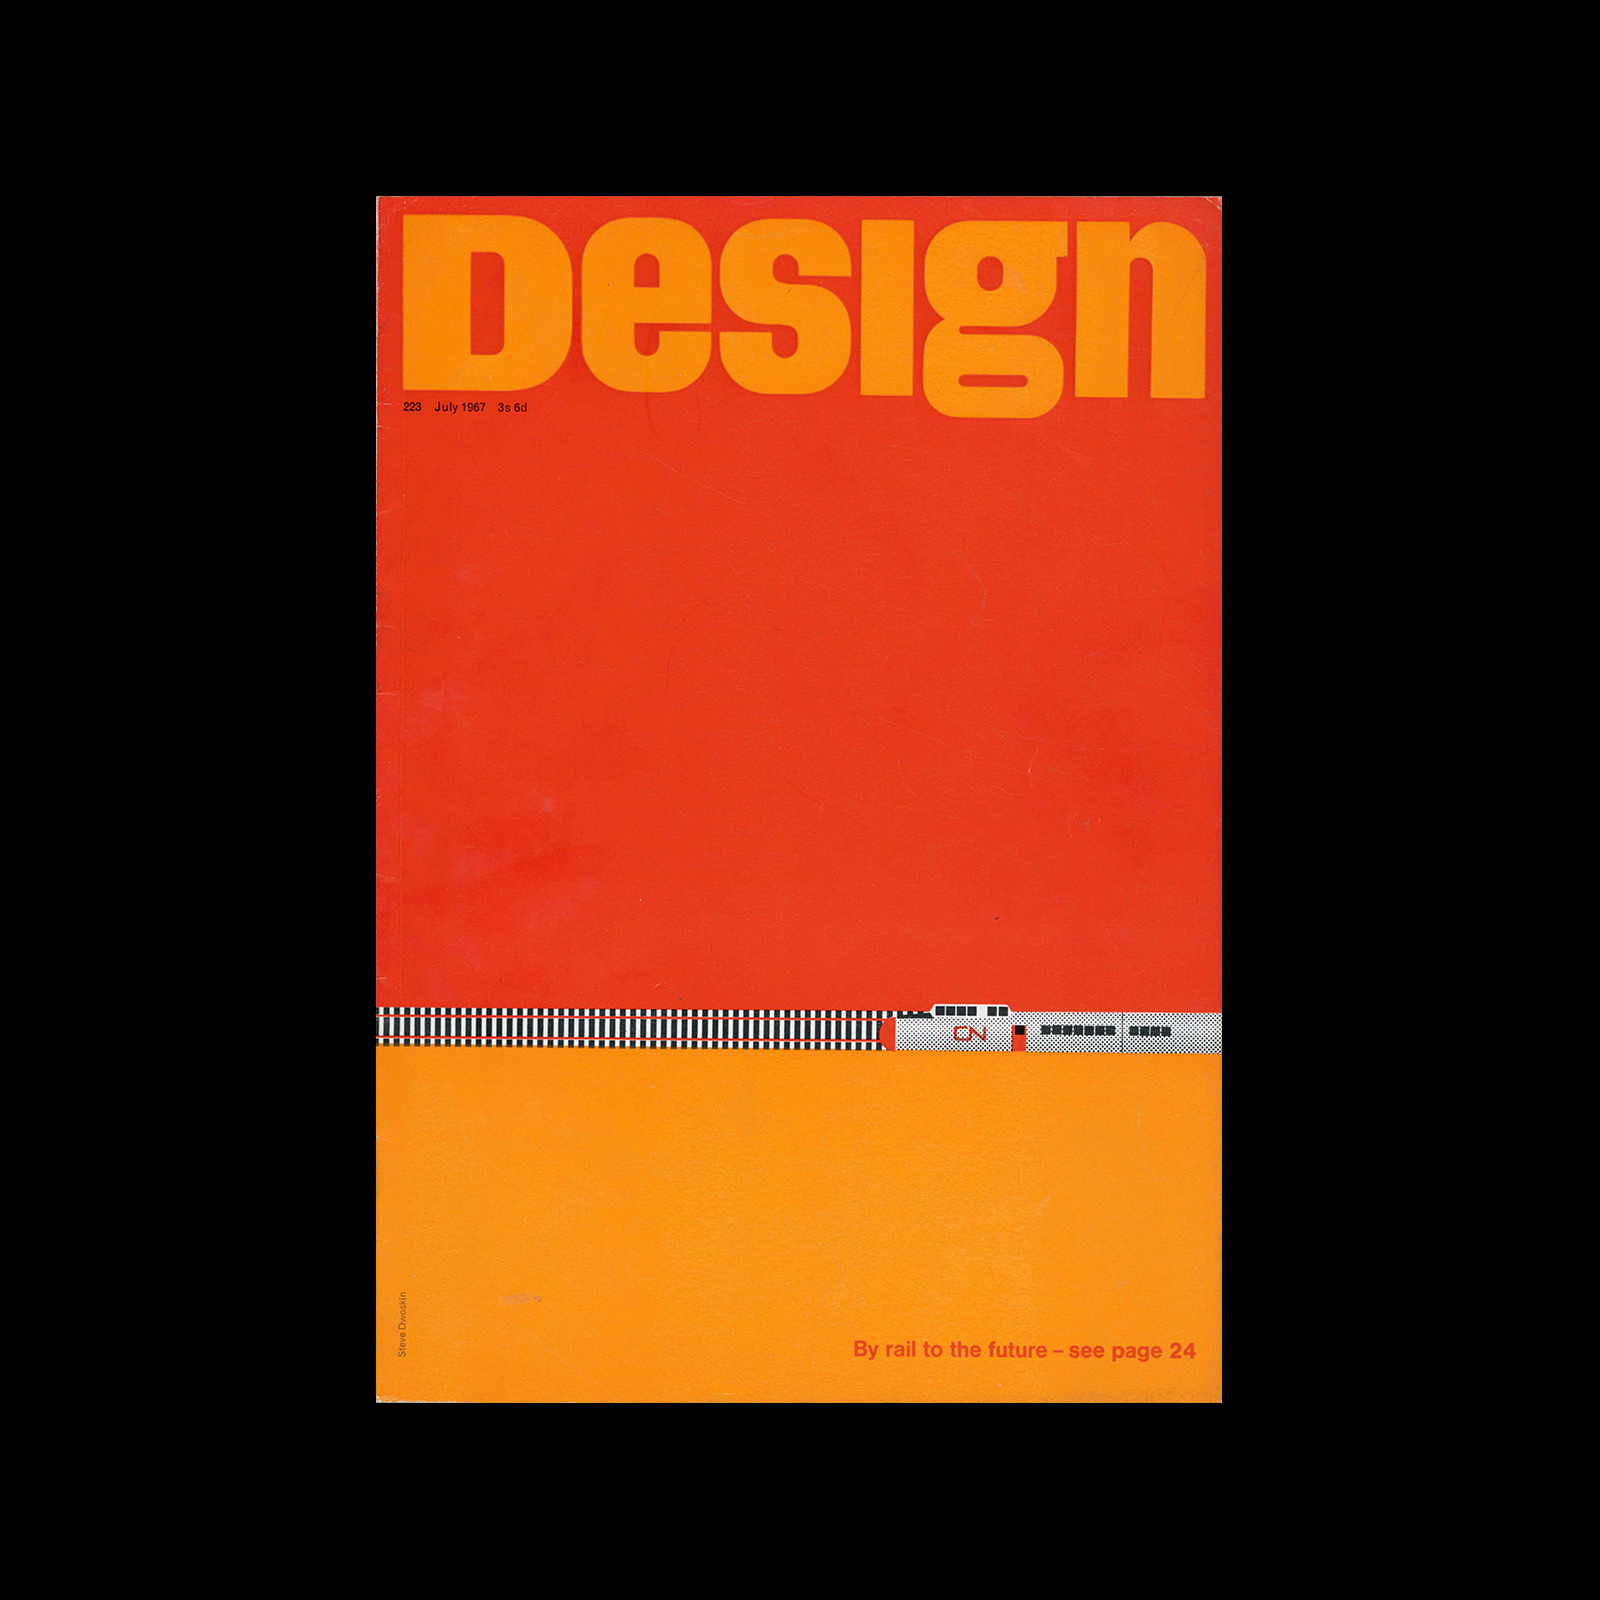 Design, Council of Industrial Design, 223, July 1967. Cover design by Steve Dwoskin